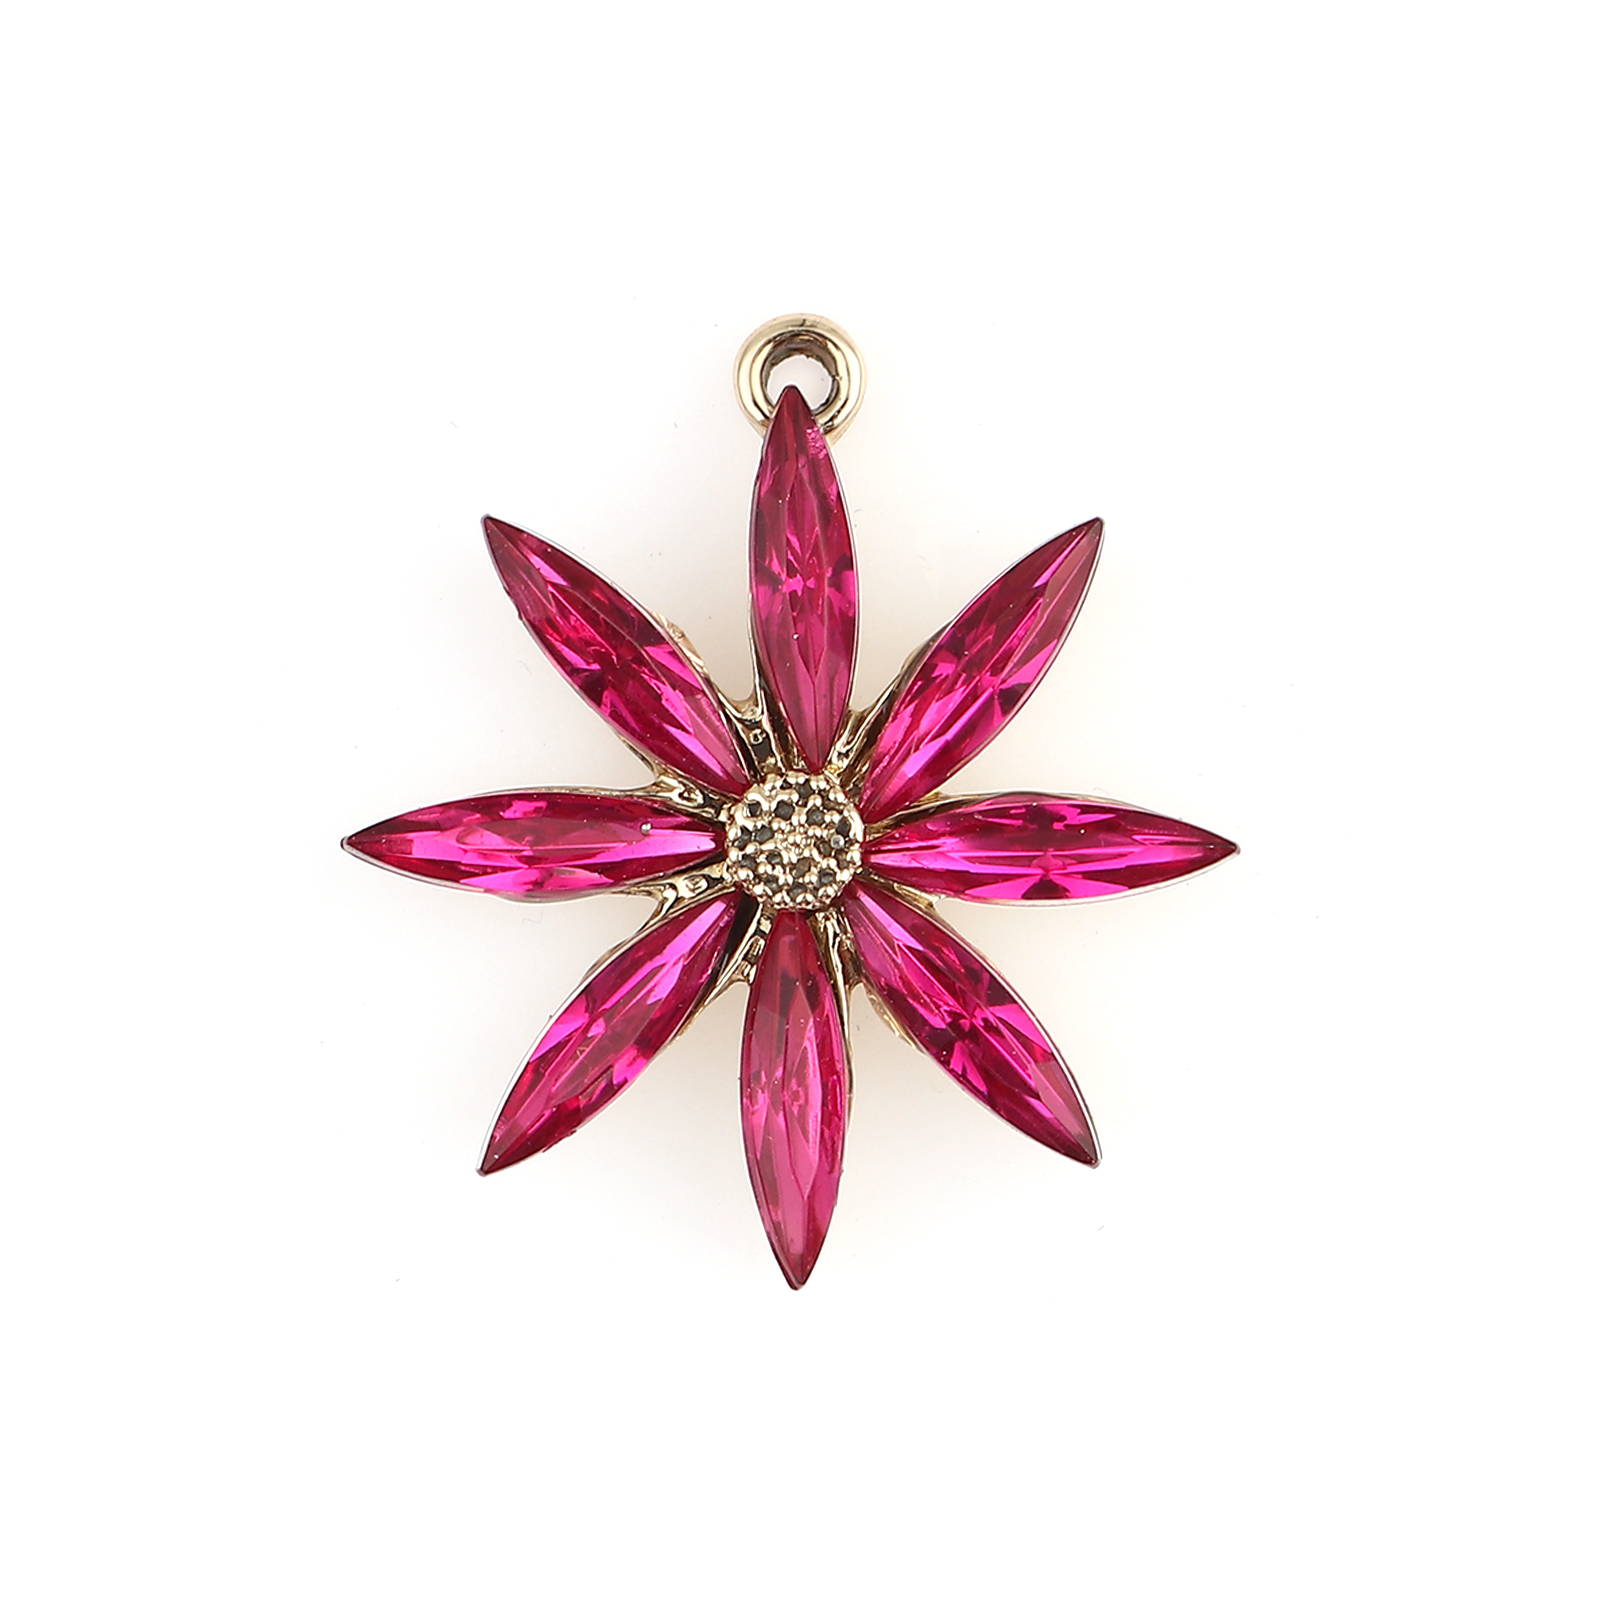 Picture of Zinc Based Alloy Charms Flower Gold Plated Fuchsia Cubic Zirconia 28mm x 26mm, 5 PCs